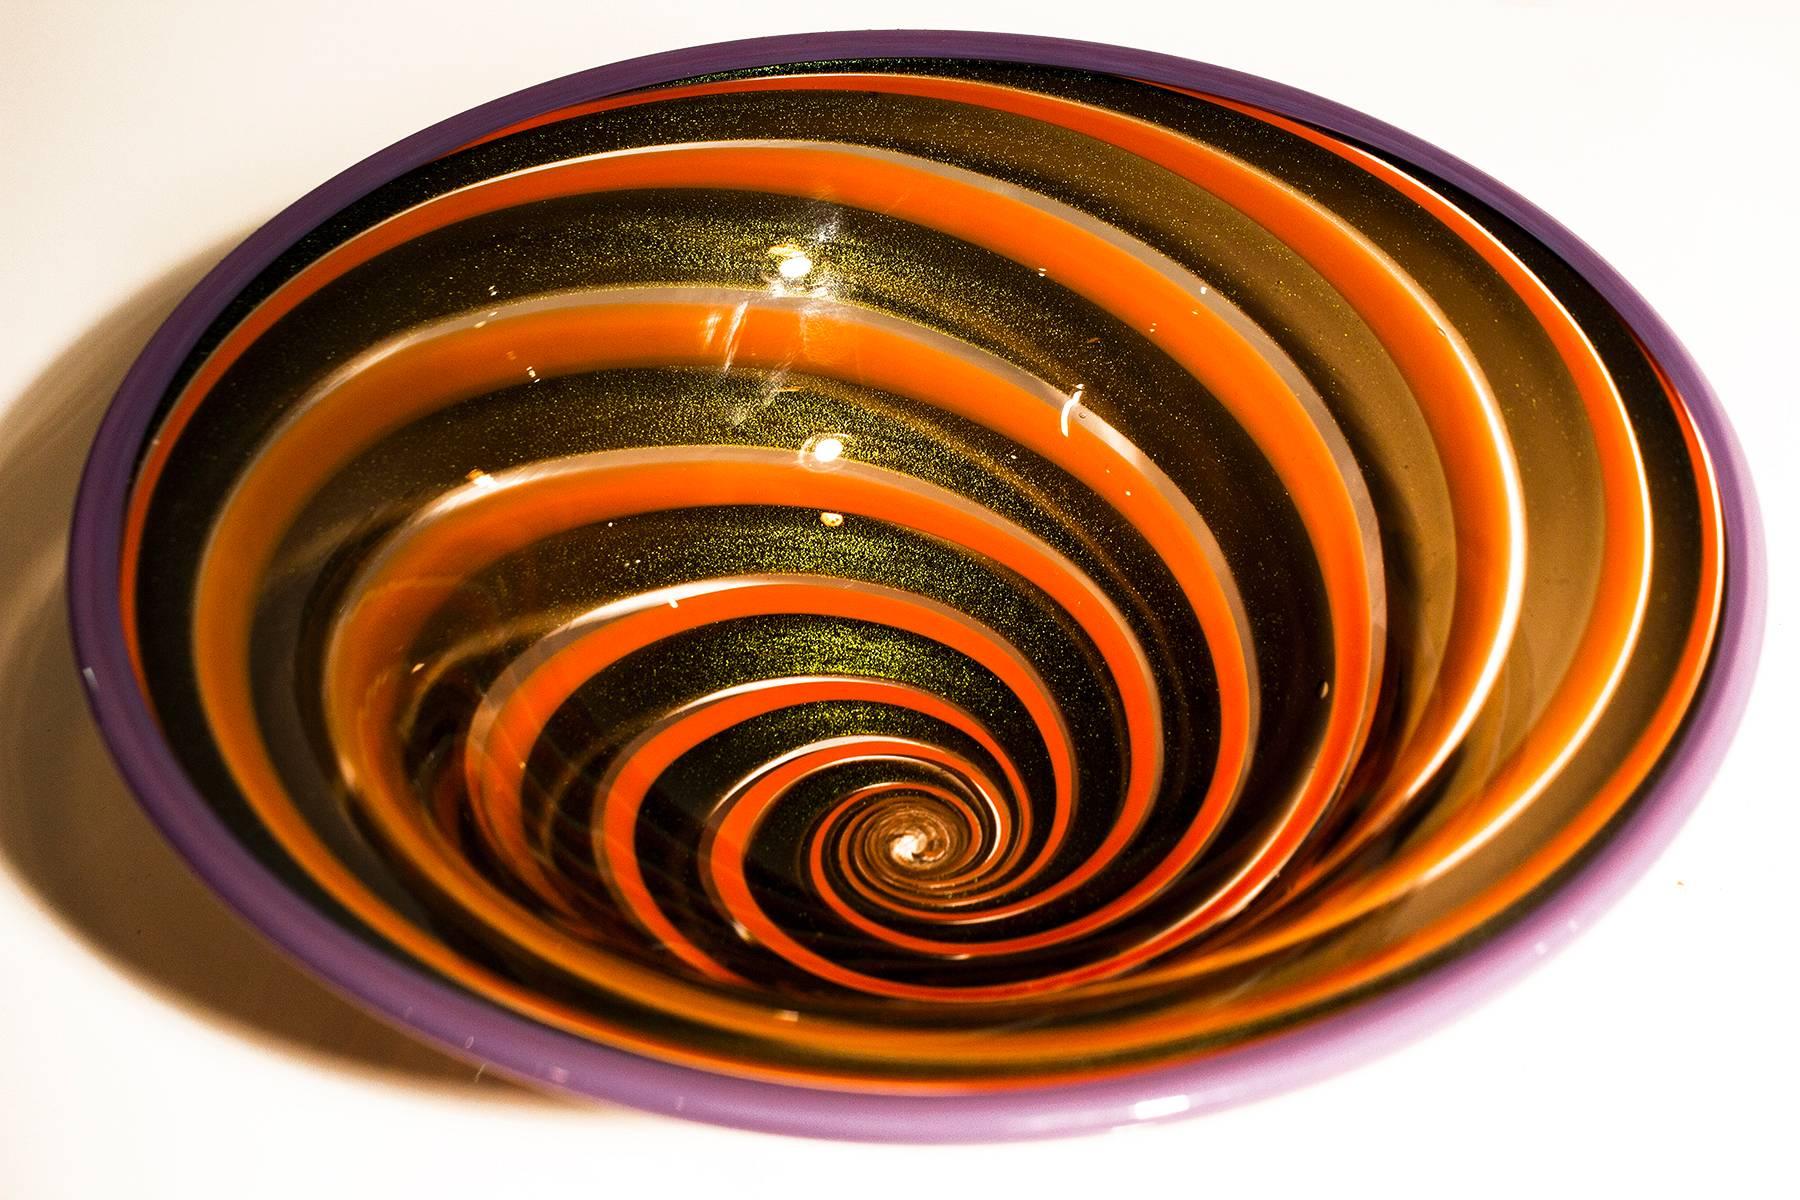 Modern Exquisite Gold Fleck and Orange Swirl Art Glass Bowl, Signed